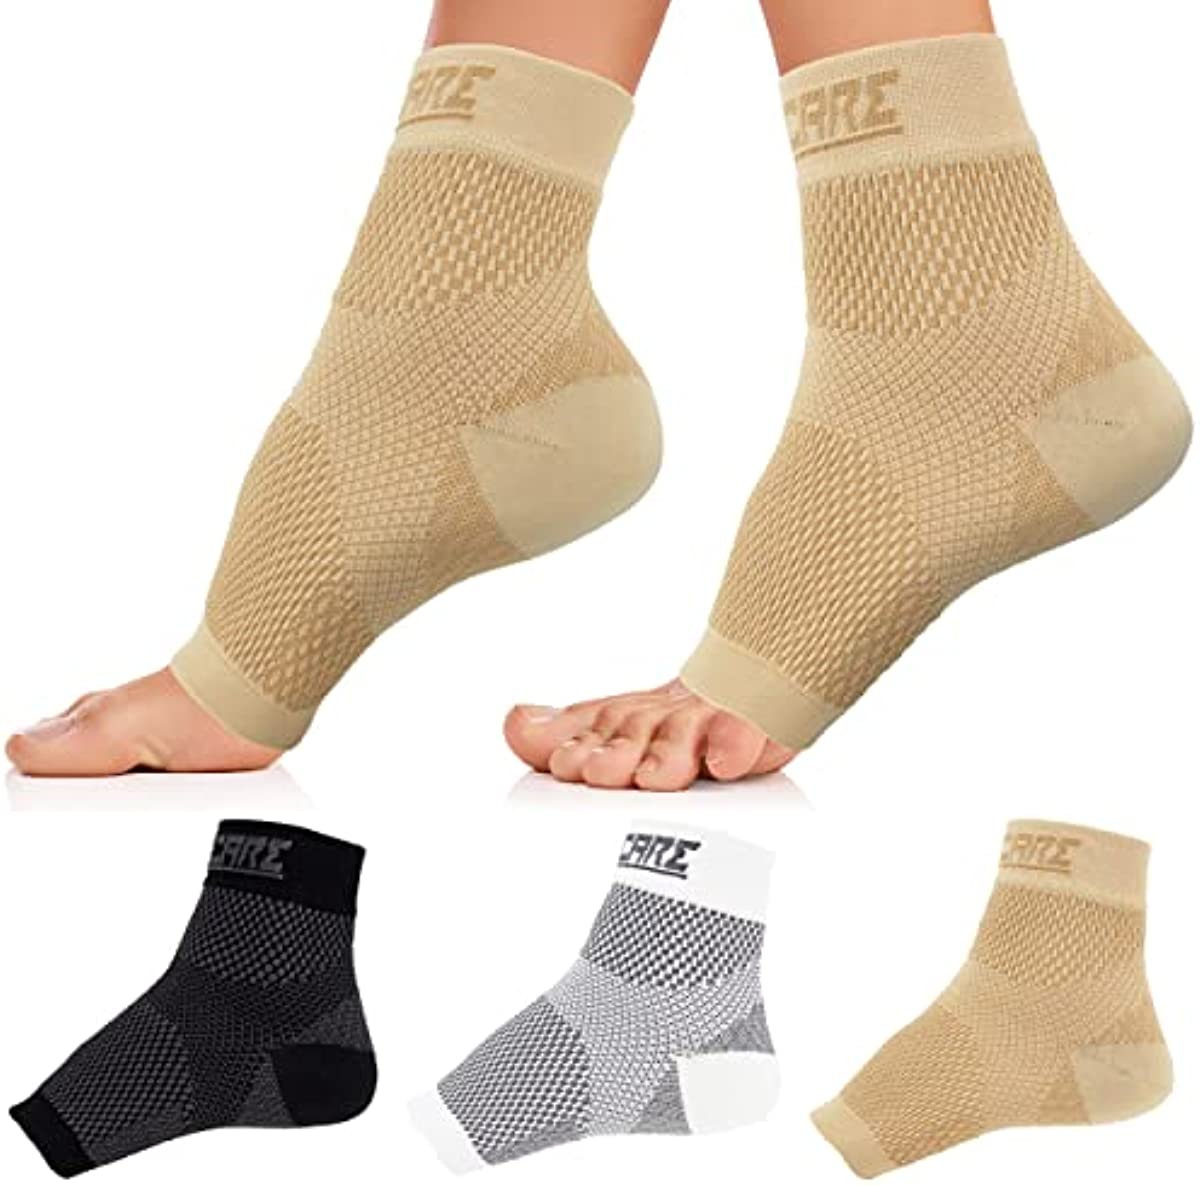 Thoxcare Plantar Fasciitis Compression Socks for Women & Men (1 Pair) – Best Ankle Brace Compression Sleeve with Arch Support for Everyday Wear, Swelling & Pain Relief, Beige, Medium